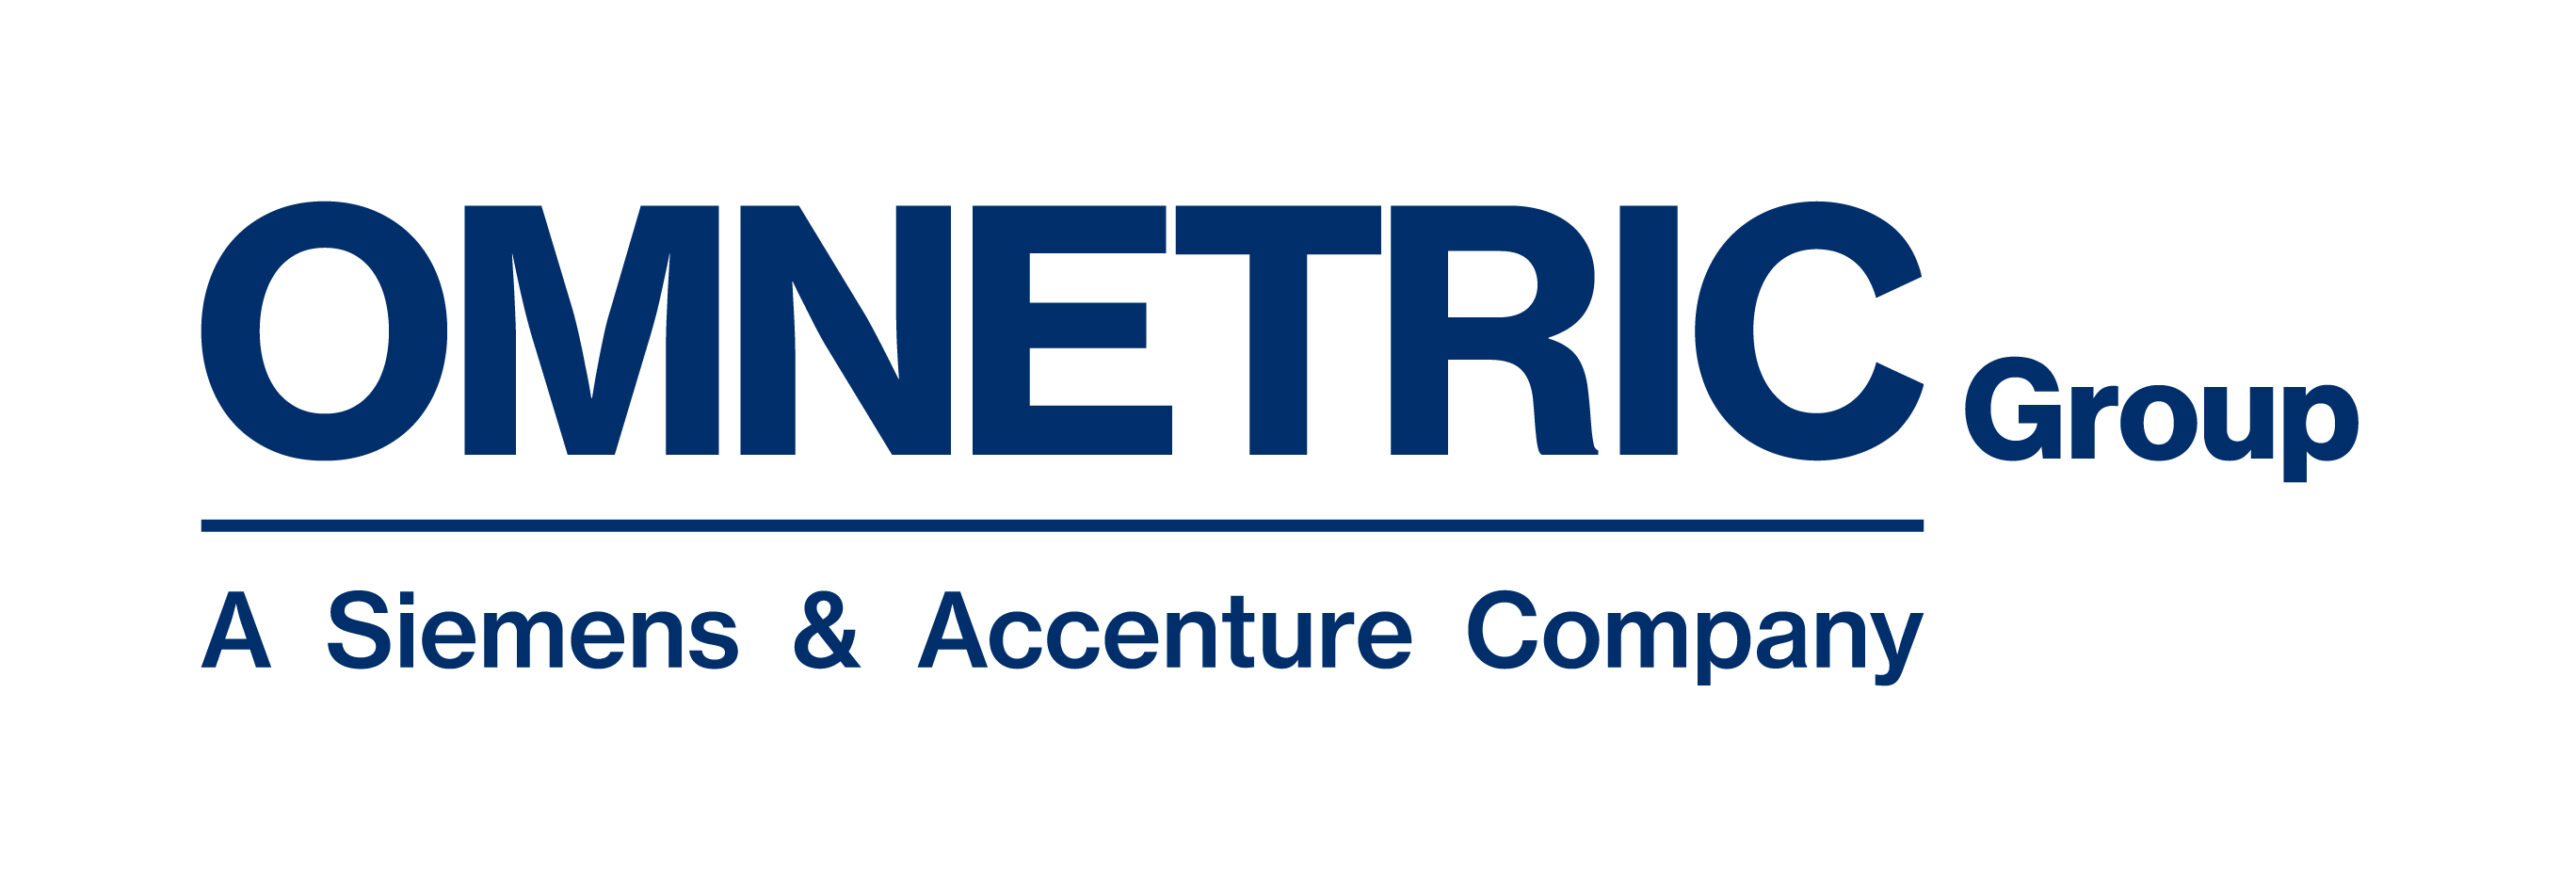 Text logo of the OMNETRIC Group